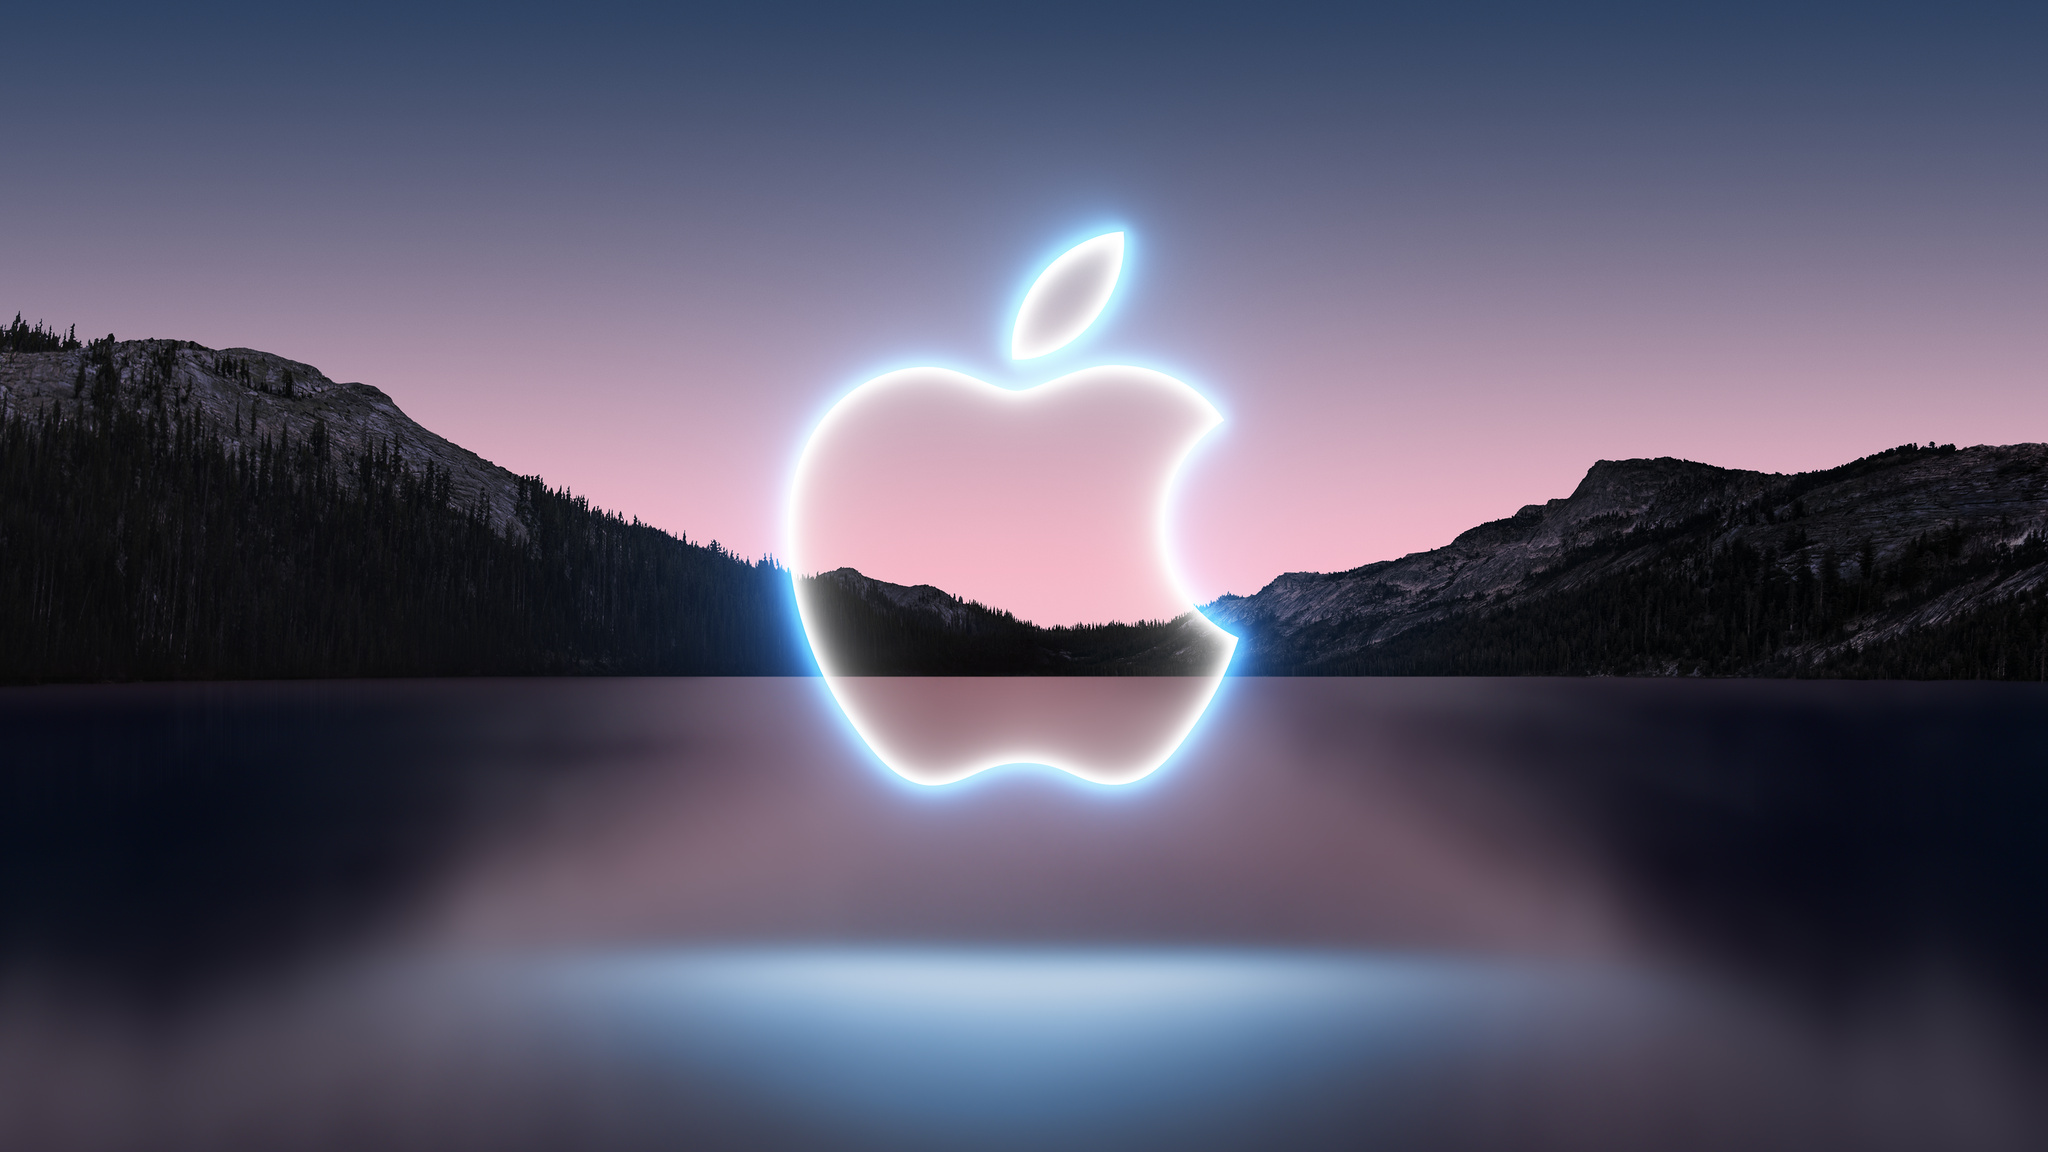 iPhone California Streaming Event Wallpaper Right Here